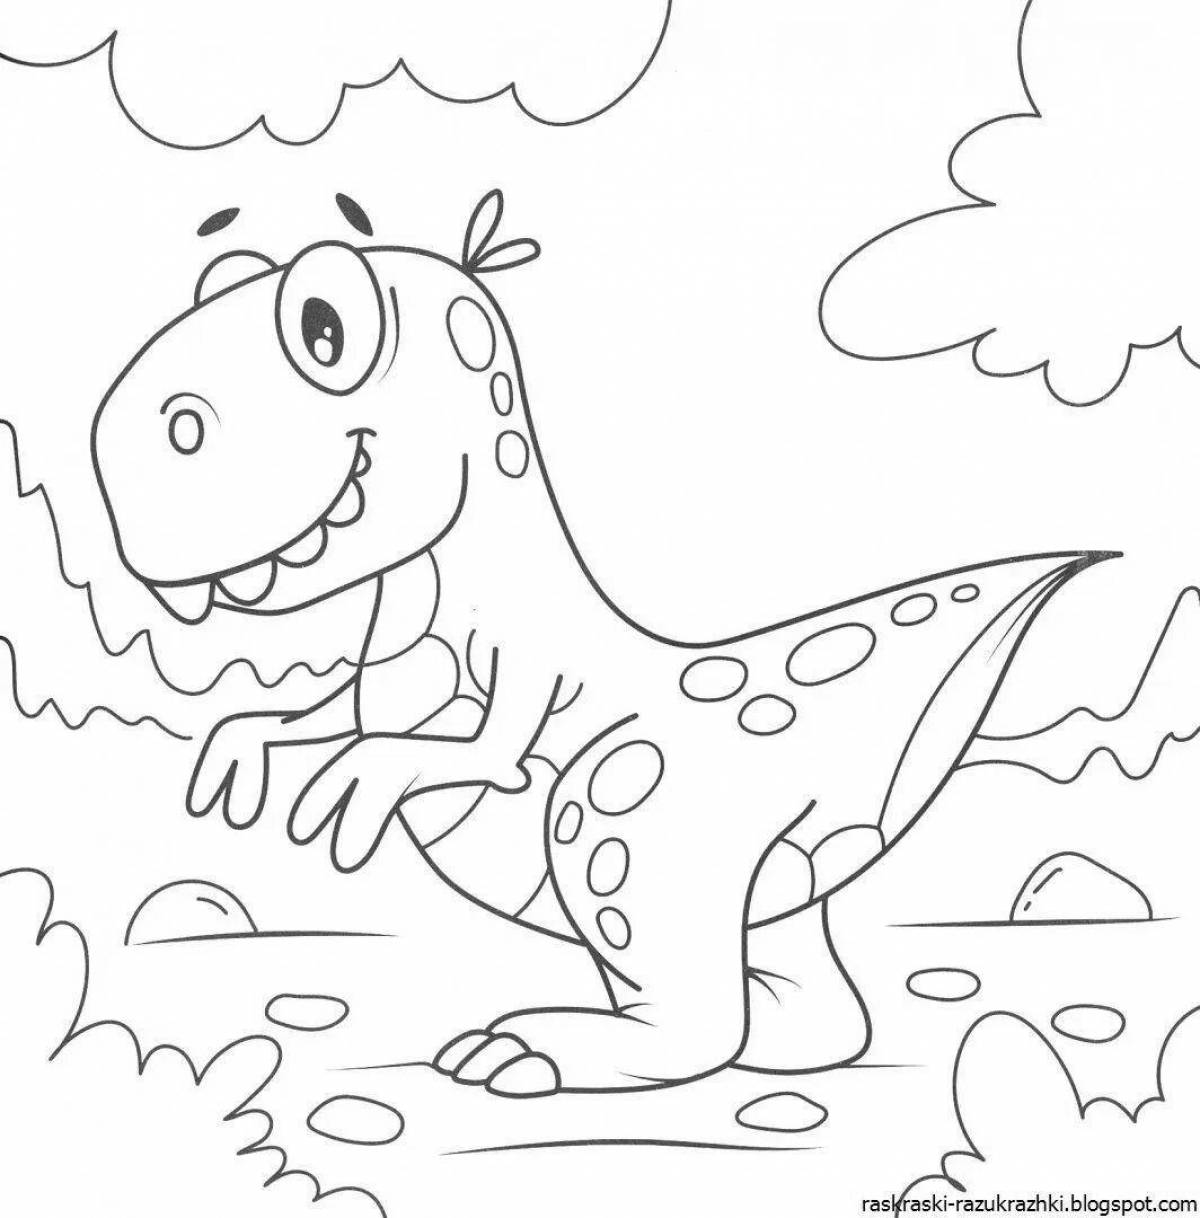 Coloring pages of dinosaurs